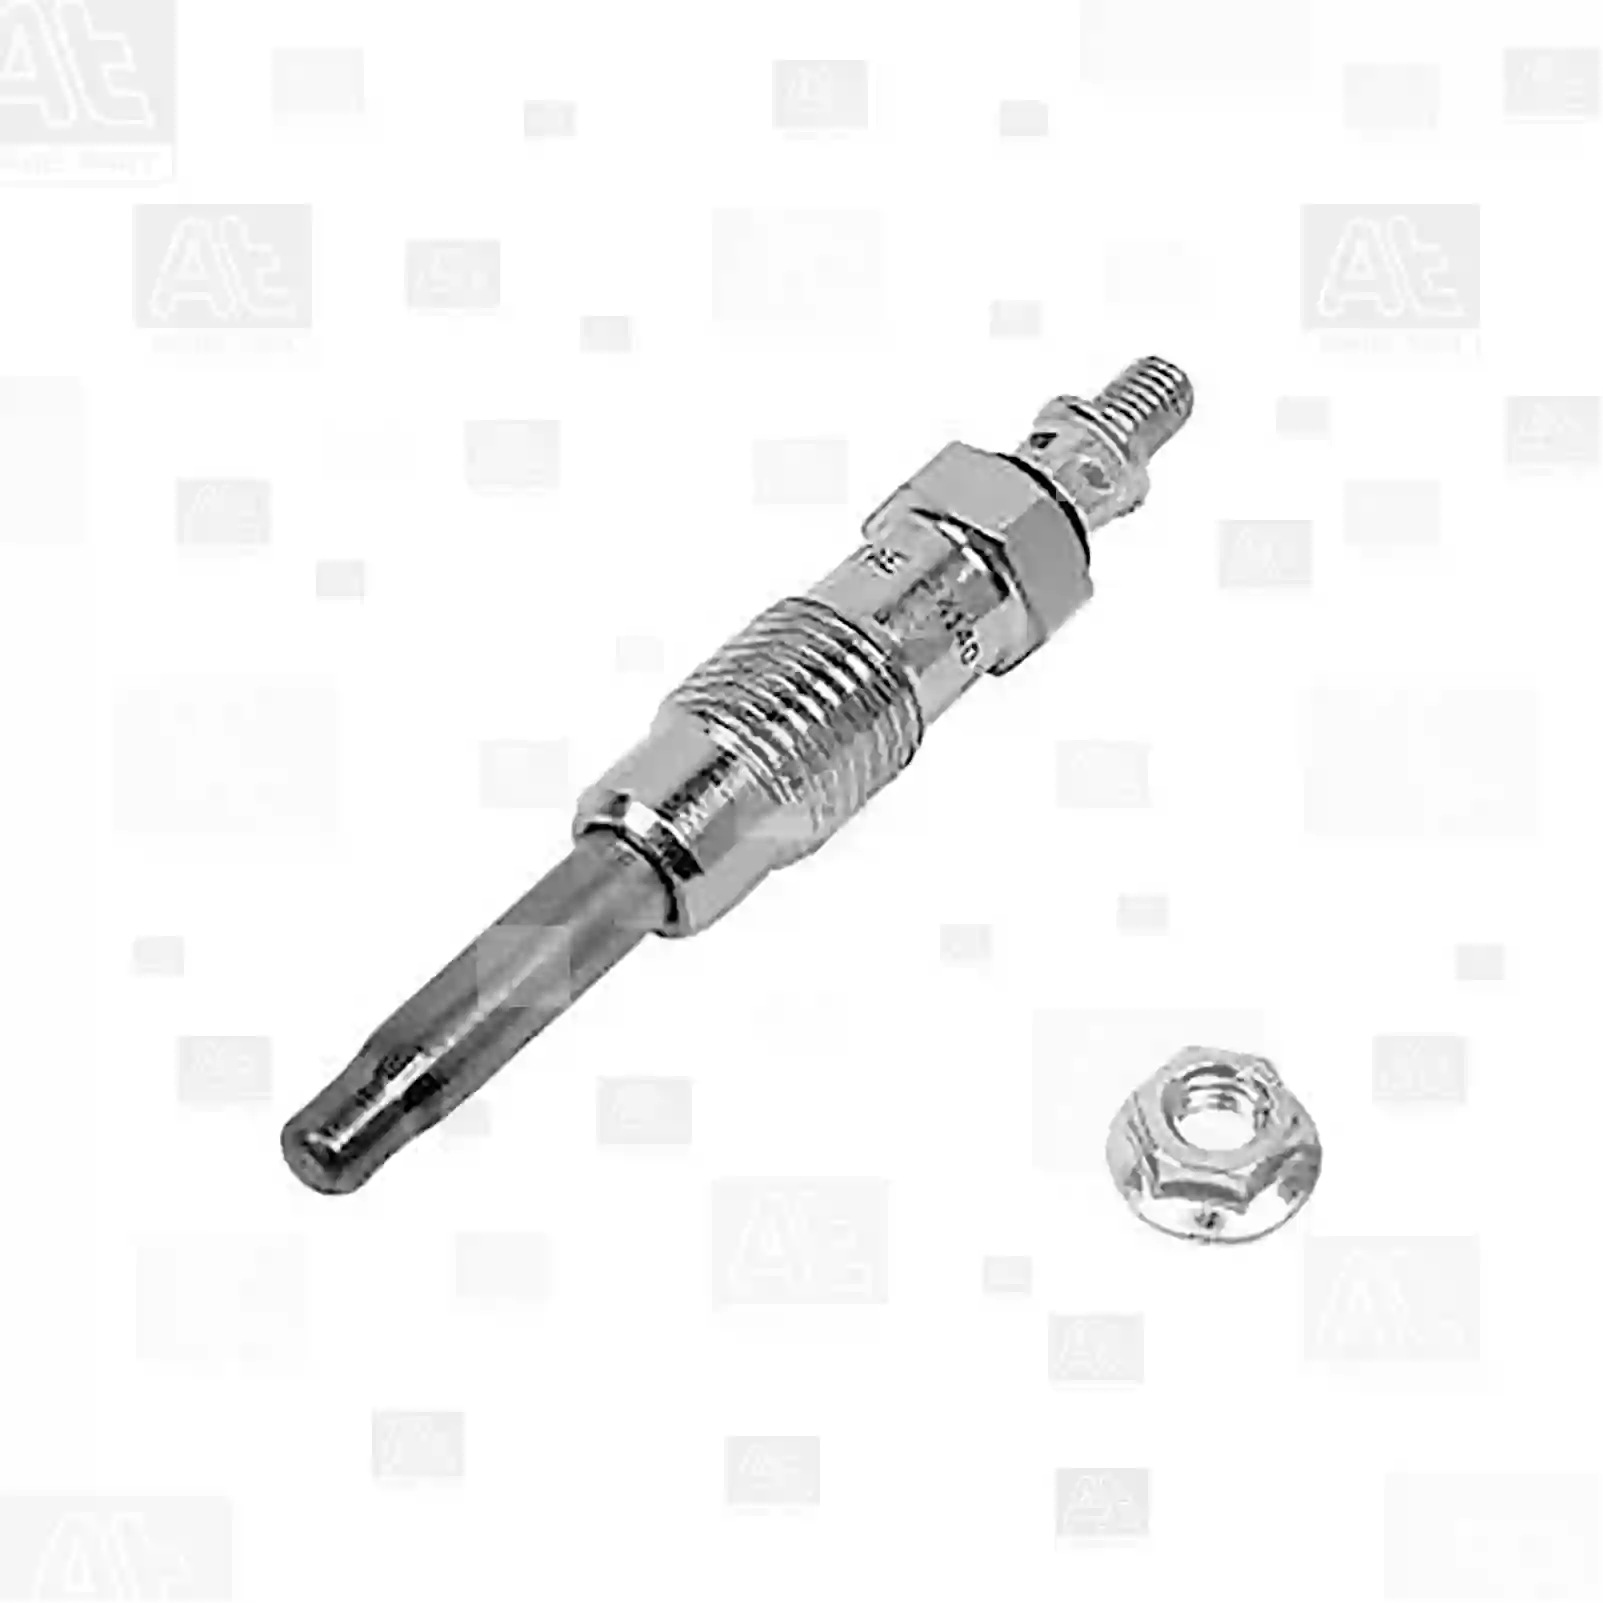 Glow plug, 77700226, 04474413, 04714294, 04729585, 04738576, 04752281, 04754011, 04774412, 04774413, 04781356, 04849406, 04849466, 05951881, 07634328, 60507123, 60596245, 60812292, 71735461, 77359200, 9616572480, 9633214380, 88900728, 12121288245, 12231286058, 12232240255, 12239061353, 596139, 596140, 596153, 596154, 596157, 596158, 596203, 59620Y, 59621X, 59621Z, 59623H, 59623J, 596274, 5962G7, 5962J2, 5962J4, 5962J5, 5962J6, 5962J7, 5962K5, 5962R8, 5962S8, 5962T1, 5962T2, 5962T3, 5962W8, 5962X1, 7932564528, 7932567717, 7932567718, 9150771880, 9150861080, 9152184980, 9153664680, 9549320680, 9553478880, 9607625880, 9610468980, 9616572480, 9614167880, 105977, 1353958, 192618, 04774413, 04781356, 04833643, 04849406, 05951879, 05951880, 05951881, 07634328, 50032392, 60507123, 60800110, 71719015, 1608204, 1626445, 055124, 1103, B26SR, B48R, 1214055, 1214303, 1214304, 1214305, 1214306, 1214307, 1214317, 1214318, 1214319, 1214324, 1214702, 88900723, 88900739, 88900740, 88900743, 90033357, 90051950, 90093867, 90093897, 90166155, 90210824, 90509368, 90510924, 90540864, 93197243, 93893040, 93893043, 93893047, 93893051, 93893052, 93893057, 94221719, 94241449, 94319700, 94422171, 94439218, 95508495, 36710-29000, 36710-29001, 5-81410040-0, 5-81410055-2, 5-81410056-3, 5-81410058-3, 8-94144412-0, 8-94144412-1, 8-94221719-3, 8-94241449-0, 8-94241449-1, 8-94241499-0, 8-94249692-1, 8-94255588-0, 8-94319700-1, 8-94319700-2, 8-94439218-0, 9-82511957-0, 9-82511964-0, 9-82511978-0, 9-82511978-1, 9-82511978-2, 9-82511978-3, 02997077, 04774413, 04781356, 04783047, 04841294, 04849406, 05951879, 4774413, 4781356, 4783047, 4841294, 4849406, 5951879, 98462490, 212153740010, 04833643, 04849406, 04896406, 05951881, 05951882, 05973752, 07634328, 60507123, 60596245, 60800110, 71719015, 71735461, 9616572480, 9633214380, 96165724, ERC8450, STC2222, STC2223, 596158, 1072100089, 6254414, 0001597701, 0001598101, 0001598301, 0011592201, 0011593501, 0011597501, 11065-Y9703, 1214055, 1214308, 1214311, 1214312, 1214318, 5614221, K666AF01, 596139, 596140, 596153, 596154, 596157, 596158, 596203, 59620Y, 59621X, 59621Z, 59623H, 59623J, 596274, 5962G7, 5962J2, 5962J4, 5962J5, 5962J6, 5962J7, 5962K5, 5962R8, 5962S8, 5962T1, 5962T2, 5962T3, 5962W8, 5962X1, 7932564528, 7932567717, 7932567718, 9150771880, 9150861080, 9152184980, 9153664680, 9549320680, 9553478880, 9607625880, 9610468980, 9616572480, 438036, 5001001587, 7700662199, 7700673874, 7700701130, 7700704185, 7700715768, 7700733076, 7700741144, 7700854538, 7700855865, 7700856238, 7700856292, 7700867617, 7701029762, 7701031105, 7701039387, 7701349475, 7701349943, 7701349949, 7701414077, 7701414086, 7701414088, 7701414162, 8671004016, ADU9830, NCC10001, STC2222, STC2223, STC3103, 2883001030, 3001661159, 15320-86CA0, 1257141, 1257889, 3287815, 0003940685, 021919000C, 061905061, 068905061, N0190811, N0190812, N0190814, N0190971, N01910001, N0191001, N0191002, N0191005, N0191006, N10213001, N10213002 ||  77700226 At Spare Part | Engine, Accelerator Pedal, Camshaft, Connecting Rod, Crankcase, Crankshaft, Cylinder Head, Engine Suspension Mountings, Exhaust Manifold, Exhaust Gas Recirculation, Filter Kits, Flywheel Housing, General Overhaul Kits, Engine, Intake Manifold, Oil Cleaner, Oil Cooler, Oil Filter, Oil Pump, Oil Sump, Piston & Liner, Sensor & Switch, Timing Case, Turbocharger, Cooling System, Belt Tensioner, Coolant Filter, Coolant Pipe, Corrosion Prevention Agent, Drive, Expansion Tank, Fan, Intercooler, Monitors & Gauges, Radiator, Thermostat, V-Belt / Timing belt, Water Pump, Fuel System, Electronical Injector Unit, Feed Pump, Fuel Filter, cpl., Fuel Gauge Sender,  Fuel Line, Fuel Pump, Fuel Tank, Injection Line Kit, Injection Pump, Exhaust System, Clutch & Pedal, Gearbox, Propeller Shaft, Axles, Brake System, Hubs & Wheels, Suspension, Leaf Spring, Universal Parts / Accessories, Steering, Electrical System, Cabin Glow plug, 77700226, 04474413, 04714294, 04729585, 04738576, 04752281, 04754011, 04774412, 04774413, 04781356, 04849406, 04849466, 05951881, 07634328, 60507123, 60596245, 60812292, 71735461, 77359200, 9616572480, 9633214380, 88900728, 12121288245, 12231286058, 12232240255, 12239061353, 596139, 596140, 596153, 596154, 596157, 596158, 596203, 59620Y, 59621X, 59621Z, 59623H, 59623J, 596274, 5962G7, 5962J2, 5962J4, 5962J5, 5962J6, 5962J7, 5962K5, 5962R8, 5962S8, 5962T1, 5962T2, 5962T3, 5962W8, 5962X1, 7932564528, 7932567717, 7932567718, 9150771880, 9150861080, 9152184980, 9153664680, 9549320680, 9553478880, 9607625880, 9610468980, 9616572480, 9614167880, 105977, 1353958, 192618, 04774413, 04781356, 04833643, 04849406, 05951879, 05951880, 05951881, 07634328, 50032392, 60507123, 60800110, 71719015, 1608204, 1626445, 055124, 1103, B26SR, B48R, 1214055, 1214303, 1214304, 1214305, 1214306, 1214307, 1214317, 1214318, 1214319, 1214324, 1214702, 88900723, 88900739, 88900740, 88900743, 90033357, 90051950, 90093867, 90093897, 90166155, 90210824, 90509368, 90510924, 90540864, 93197243, 93893040, 93893043, 93893047, 93893051, 93893052, 93893057, 94221719, 94241449, 94319700, 94422171, 94439218, 95508495, 36710-29000, 36710-29001, 5-81410040-0, 5-81410055-2, 5-81410056-3, 5-81410058-3, 8-94144412-0, 8-94144412-1, 8-94221719-3, 8-94241449-0, 8-94241449-1, 8-94241499-0, 8-94249692-1, 8-94255588-0, 8-94319700-1, 8-94319700-2, 8-94439218-0, 9-82511957-0, 9-82511964-0, 9-82511978-0, 9-82511978-1, 9-82511978-2, 9-82511978-3, 02997077, 04774413, 04781356, 04783047, 04841294, 04849406, 05951879, 4774413, 4781356, 4783047, 4841294, 4849406, 5951879, 98462490, 212153740010, 04833643, 04849406, 04896406, 05951881, 05951882, 05973752, 07634328, 60507123, 60596245, 60800110, 71719015, 71735461, 9616572480, 9633214380, 96165724, ERC8450, STC2222, STC2223, 596158, 1072100089, 6254414, 0001597701, 0001598101, 0001598301, 0011592201, 0011593501, 0011597501, 11065-Y9703, 1214055, 1214308, 1214311, 1214312, 1214318, 5614221, K666AF01, 596139, 596140, 596153, 596154, 596157, 596158, 596203, 59620Y, 59621X, 59621Z, 59623H, 59623J, 596274, 5962G7, 5962J2, 5962J4, 5962J5, 5962J6, 5962J7, 5962K5, 5962R8, 5962S8, 5962T1, 5962T2, 5962T3, 5962W8, 5962X1, 7932564528, 7932567717, 7932567718, 9150771880, 9150861080, 9152184980, 9153664680, 9549320680, 9553478880, 9607625880, 9610468980, 9616572480, 438036, 5001001587, 7700662199, 7700673874, 7700701130, 7700704185, 7700715768, 7700733076, 7700741144, 7700854538, 7700855865, 7700856238, 7700856292, 7700867617, 7701029762, 7701031105, 7701039387, 7701349475, 7701349943, 7701349949, 7701414077, 7701414086, 7701414088, 7701414162, 8671004016, ADU9830, NCC10001, STC2222, STC2223, STC3103, 2883001030, 3001661159, 15320-86CA0, 1257141, 1257889, 3287815, 0003940685, 021919000C, 061905061, 068905061, N0190811, N0190812, N0190814, N0190971, N01910001, N0191001, N0191002, N0191005, N0191006, N10213001, N10213002 ||  77700226 At Spare Part | Engine, Accelerator Pedal, Camshaft, Connecting Rod, Crankcase, Crankshaft, Cylinder Head, Engine Suspension Mountings, Exhaust Manifold, Exhaust Gas Recirculation, Filter Kits, Flywheel Housing, General Overhaul Kits, Engine, Intake Manifold, Oil Cleaner, Oil Cooler, Oil Filter, Oil Pump, Oil Sump, Piston & Liner, Sensor & Switch, Timing Case, Turbocharger, Cooling System, Belt Tensioner, Coolant Filter, Coolant Pipe, Corrosion Prevention Agent, Drive, Expansion Tank, Fan, Intercooler, Monitors & Gauges, Radiator, Thermostat, V-Belt / Timing belt, Water Pump, Fuel System, Electronical Injector Unit, Feed Pump, Fuel Filter, cpl., Fuel Gauge Sender,  Fuel Line, Fuel Pump, Fuel Tank, Injection Line Kit, Injection Pump, Exhaust System, Clutch & Pedal, Gearbox, Propeller Shaft, Axles, Brake System, Hubs & Wheels, Suspension, Leaf Spring, Universal Parts / Accessories, Steering, Electrical System, Cabin